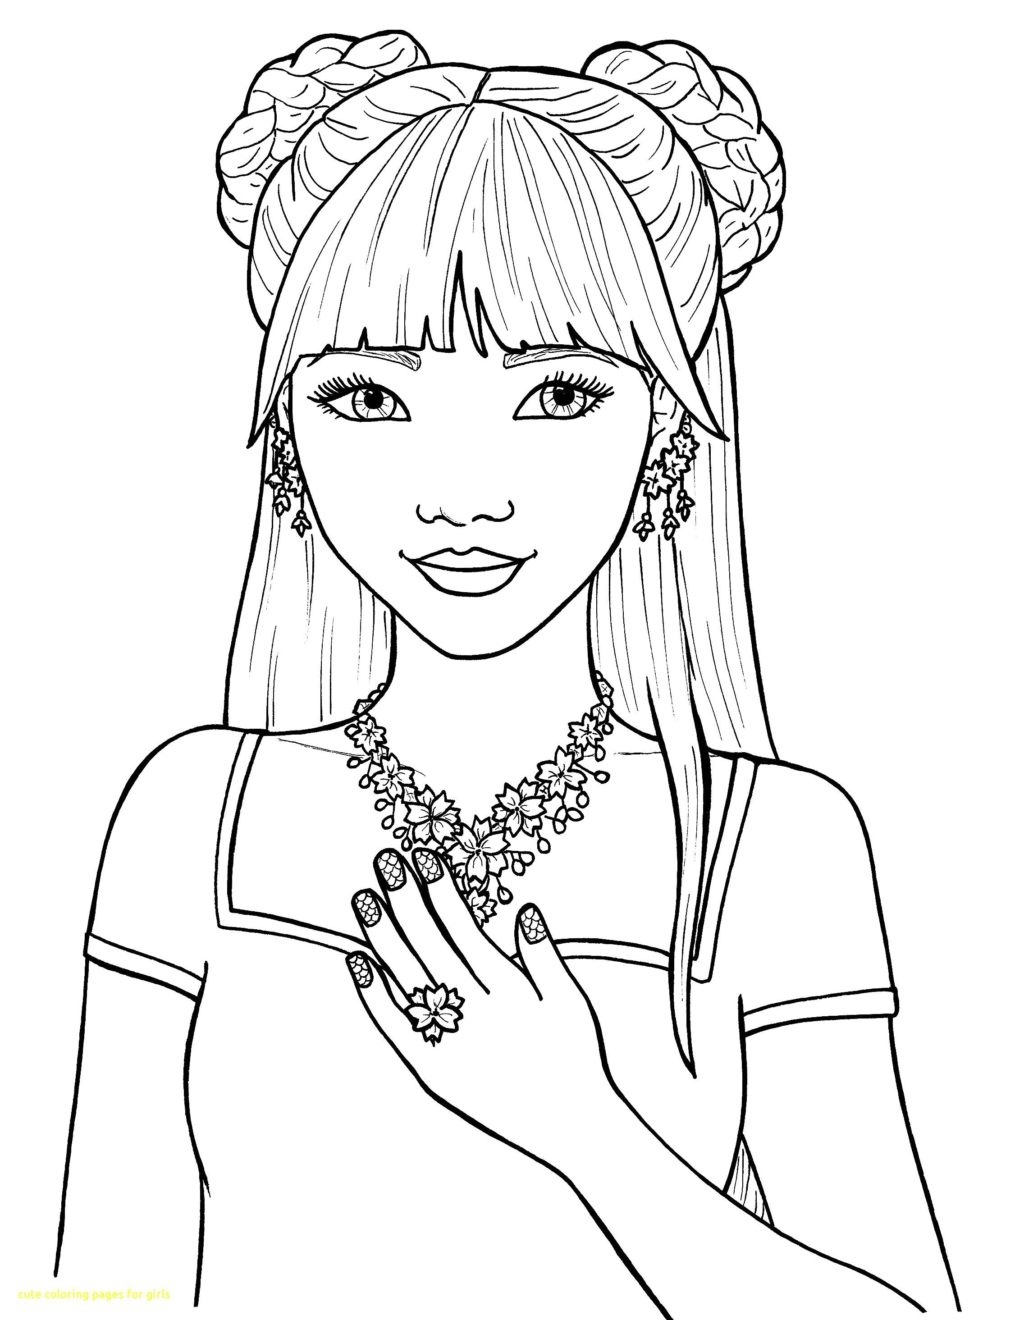 Coloring Book World ~ Staggering Free Printablering Pages For Girls - Free Printable Coloring Pages For Girls